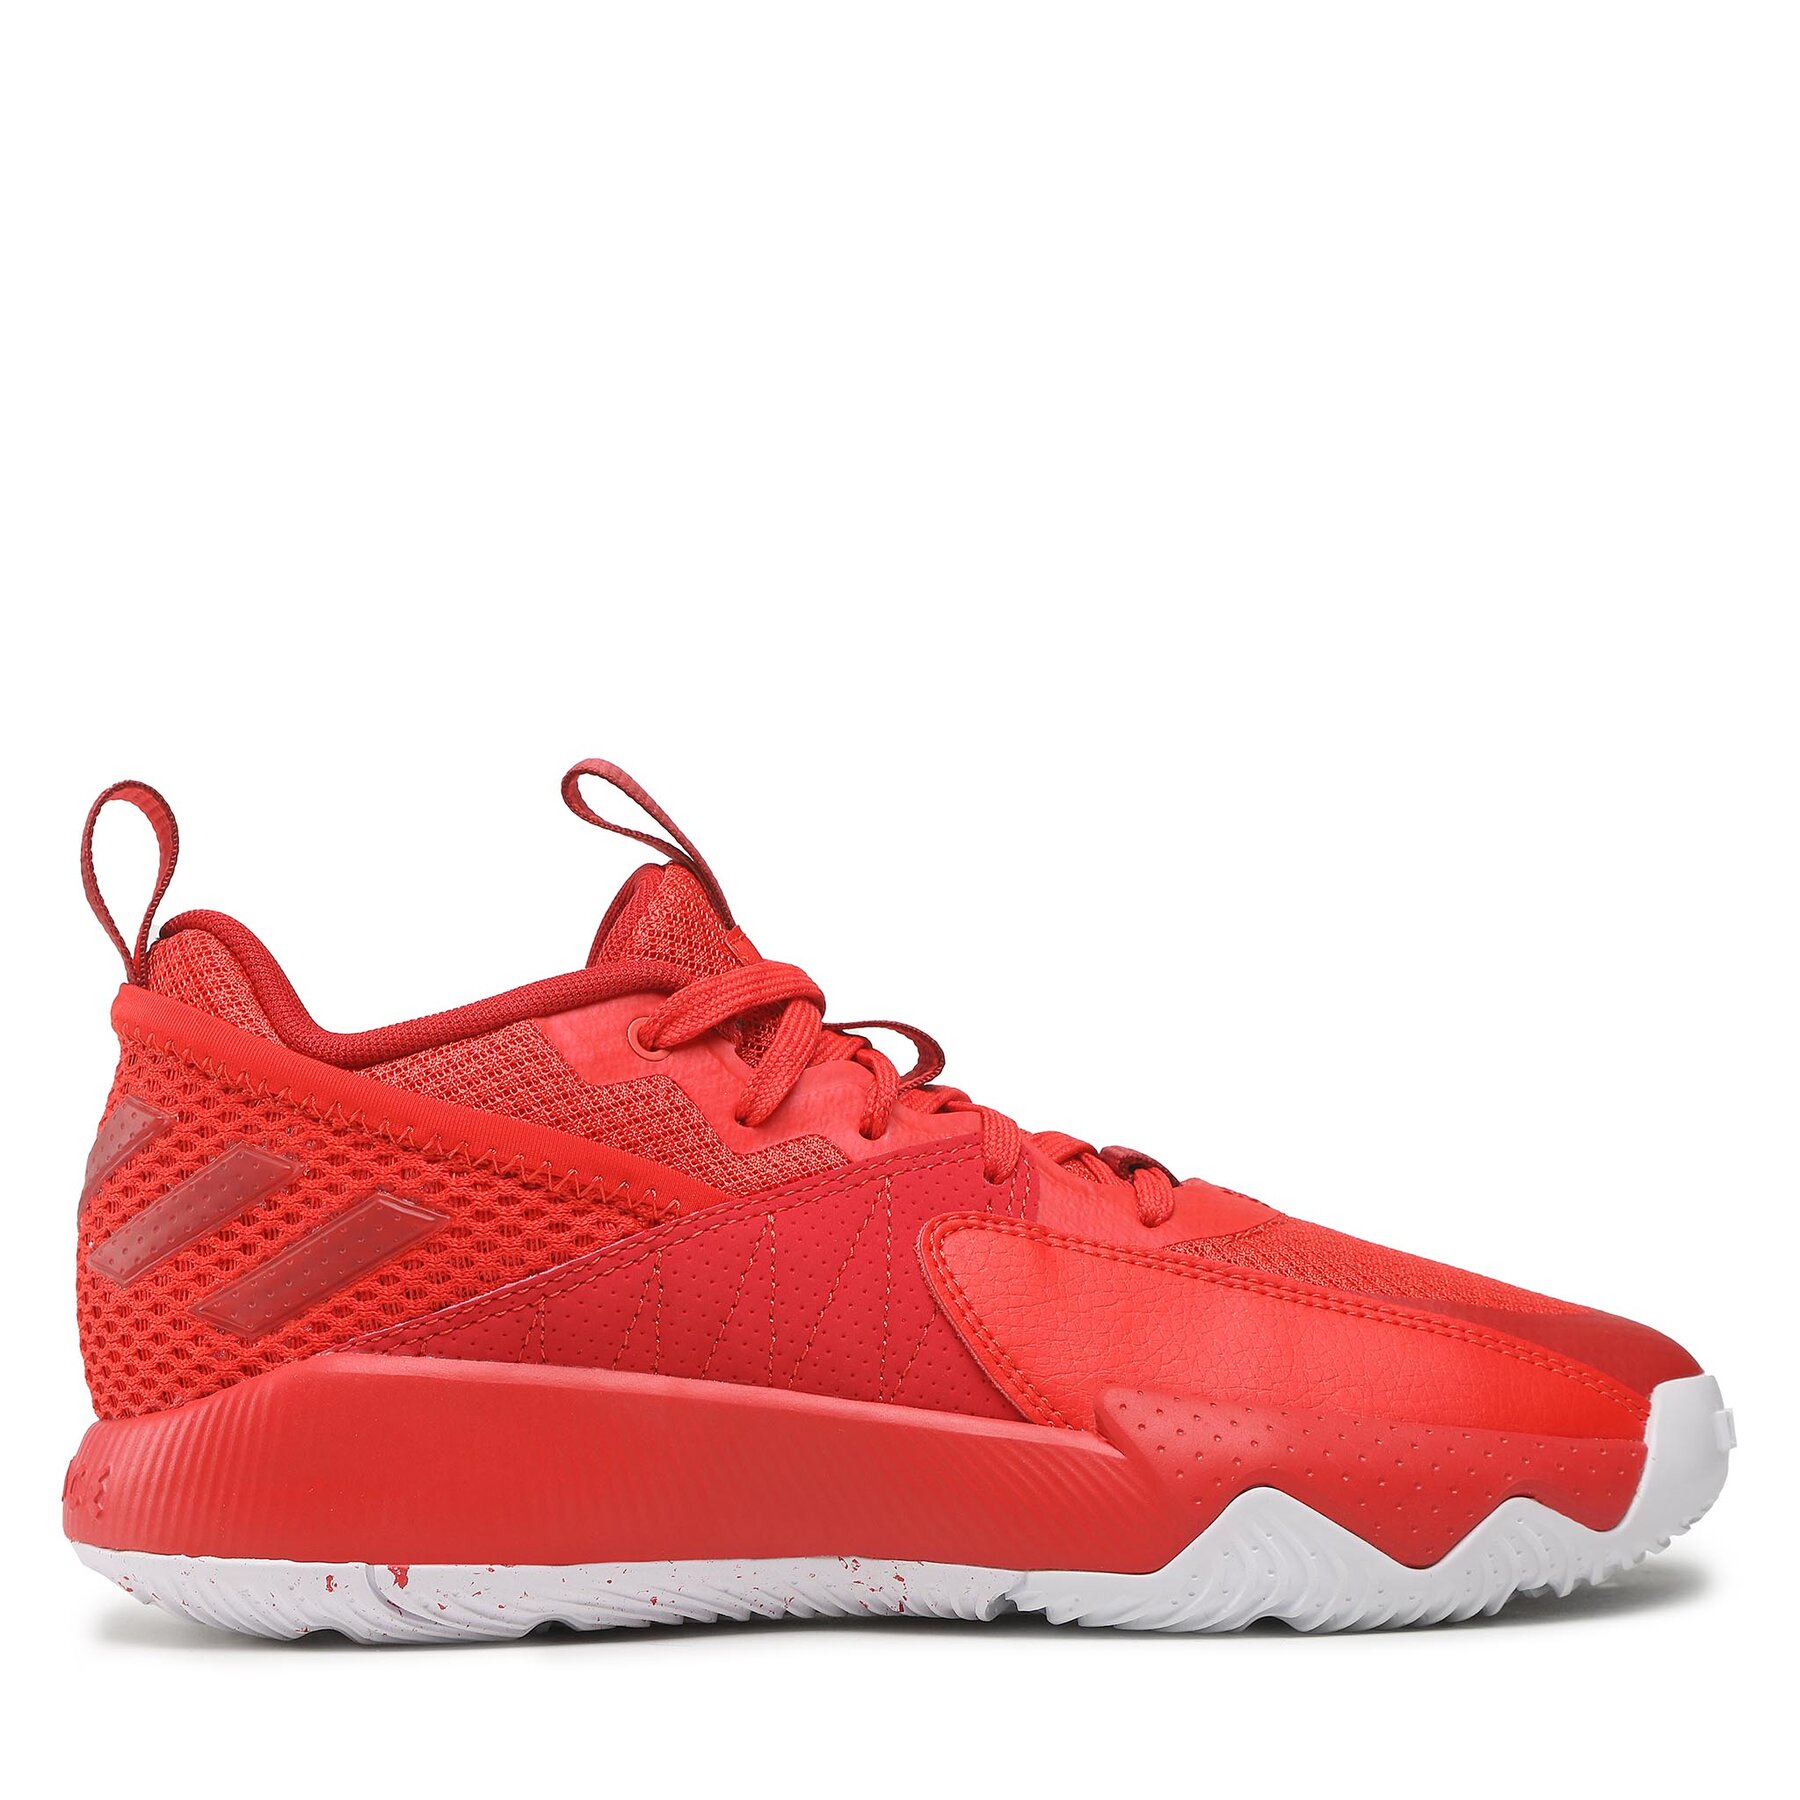 Batai adidas Dame Extply 2.0 Shoes GY2443 Red/Bright Red/Team Power Red